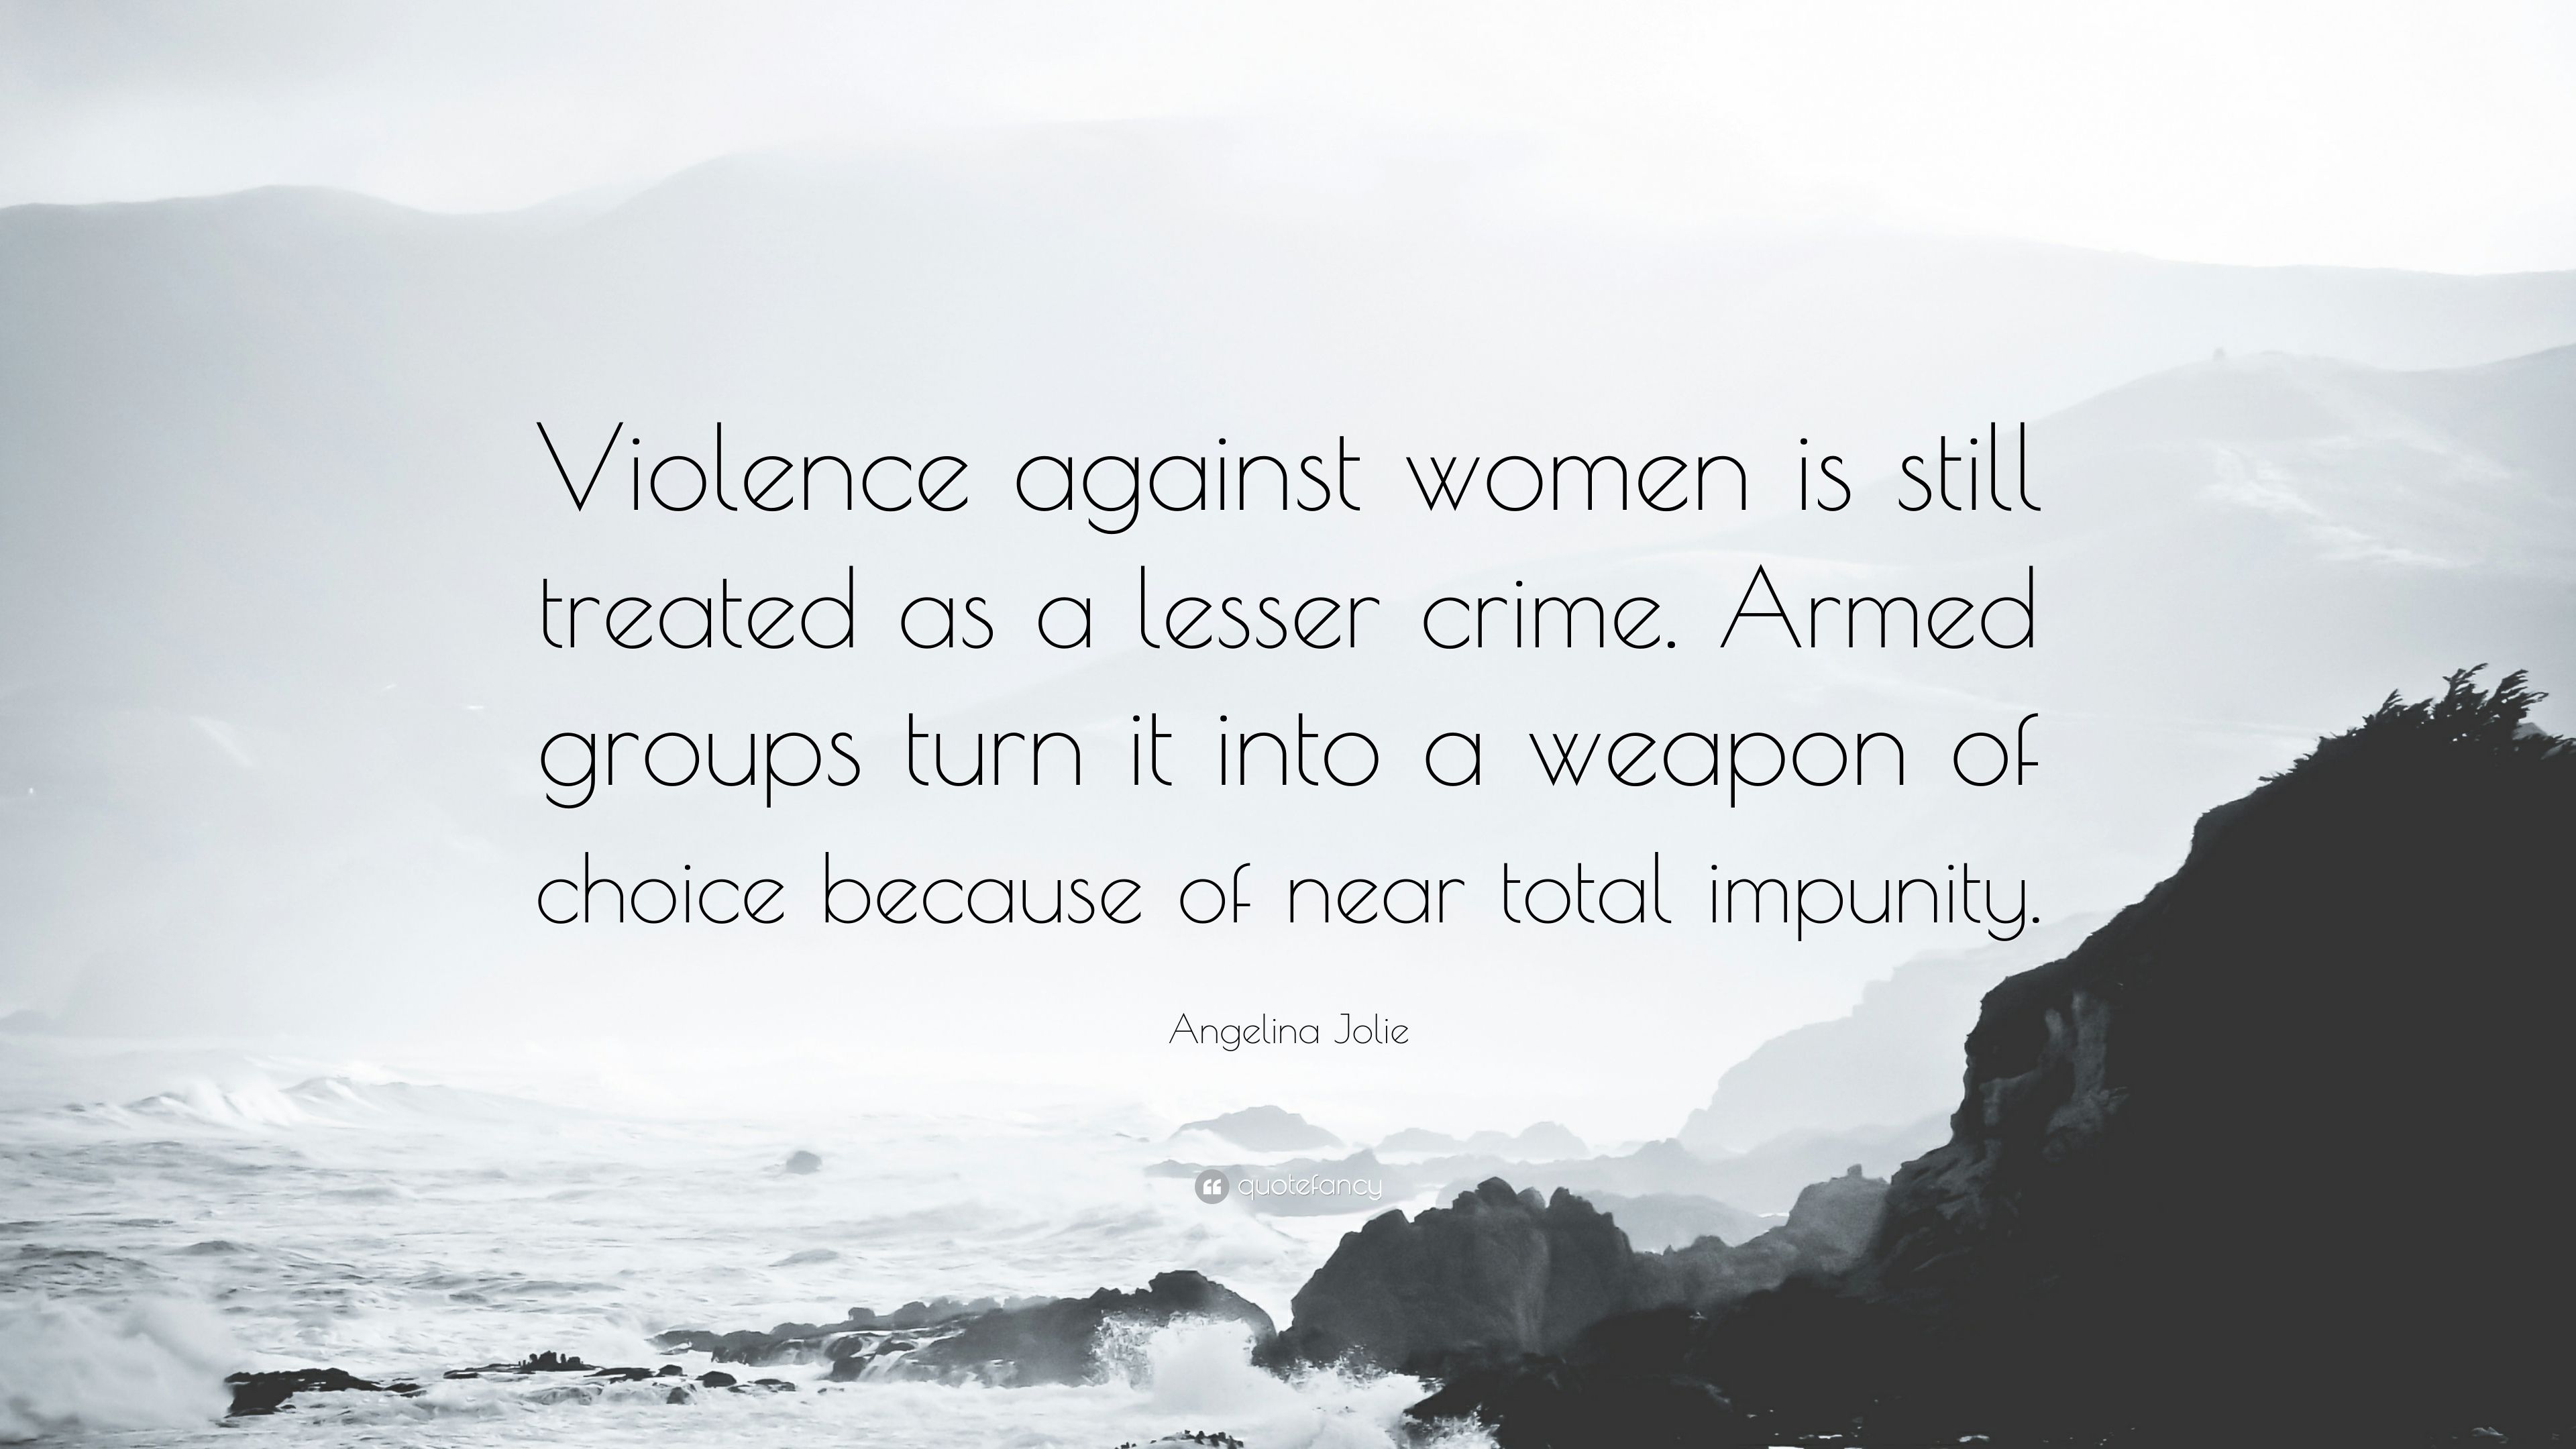 Angelina Jolie Quote: “Violence against women is still treated as